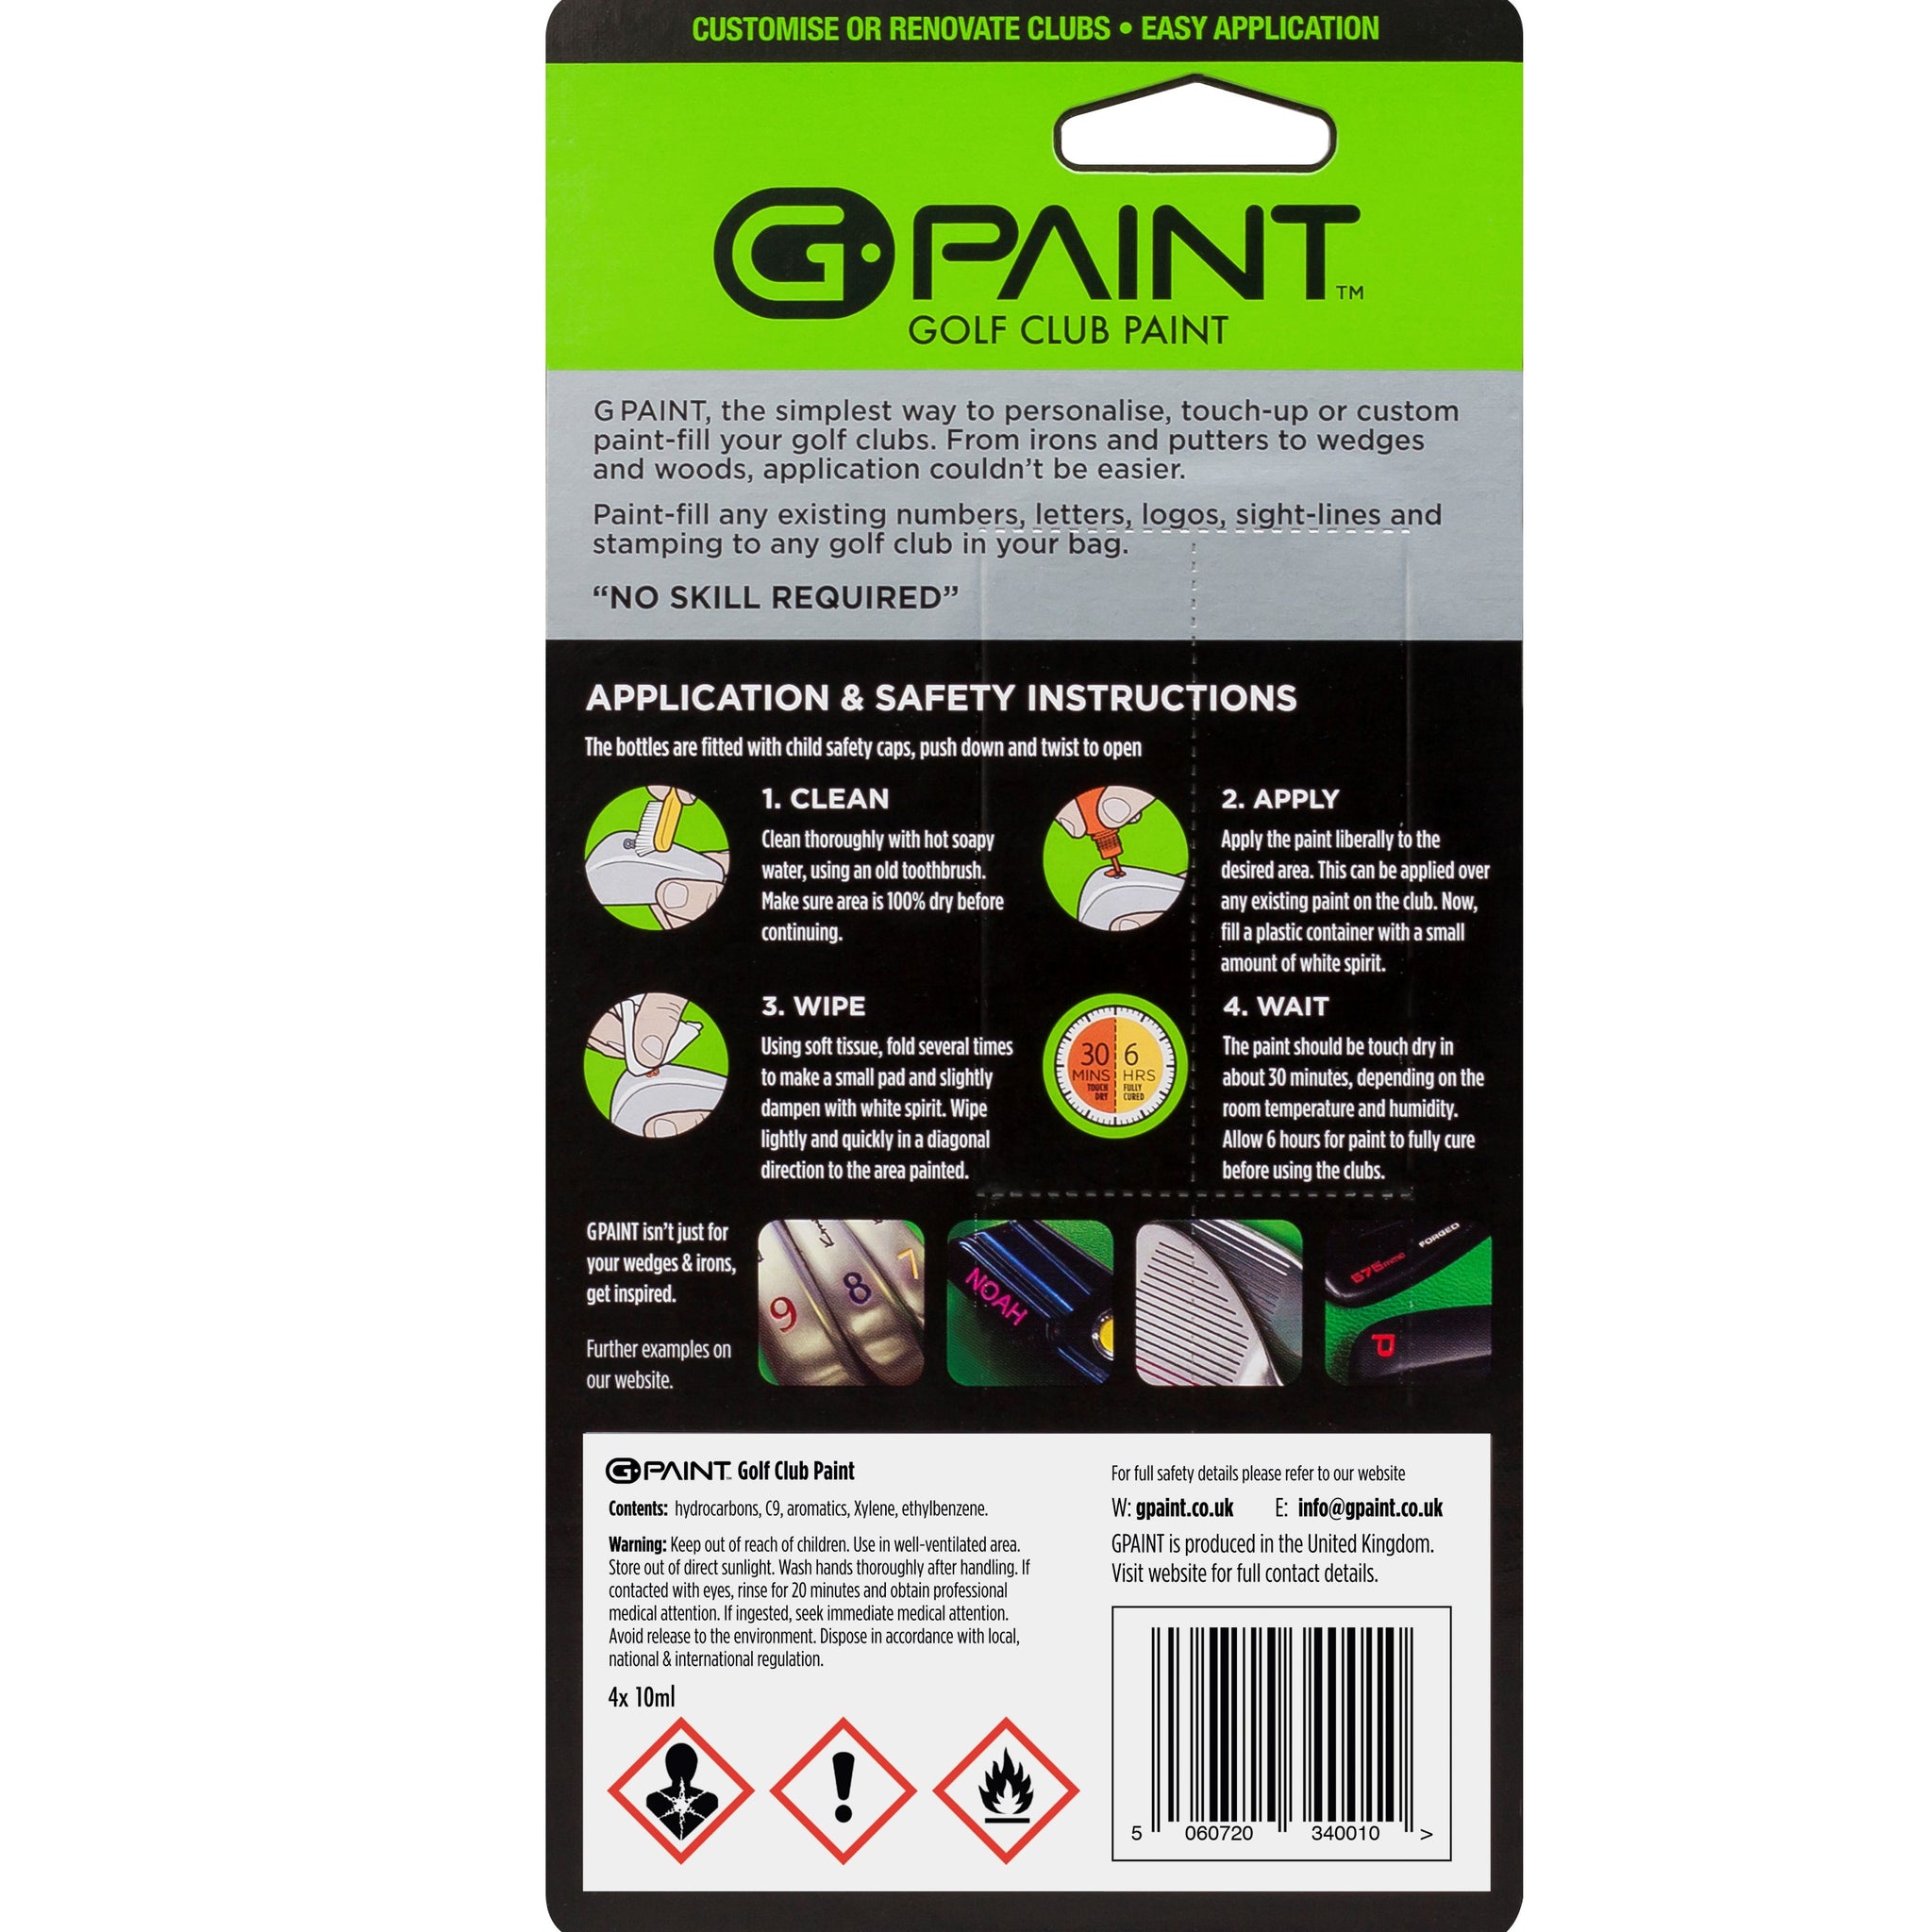  G-Paint Golf Club Paint Touch Up, Fill In, Customize or  Renovate Your Clubs - 8 Pack of 10ml Bottles. Black, White, Red, Blue,  Yellow, Pink, Orange & Green : Sports 